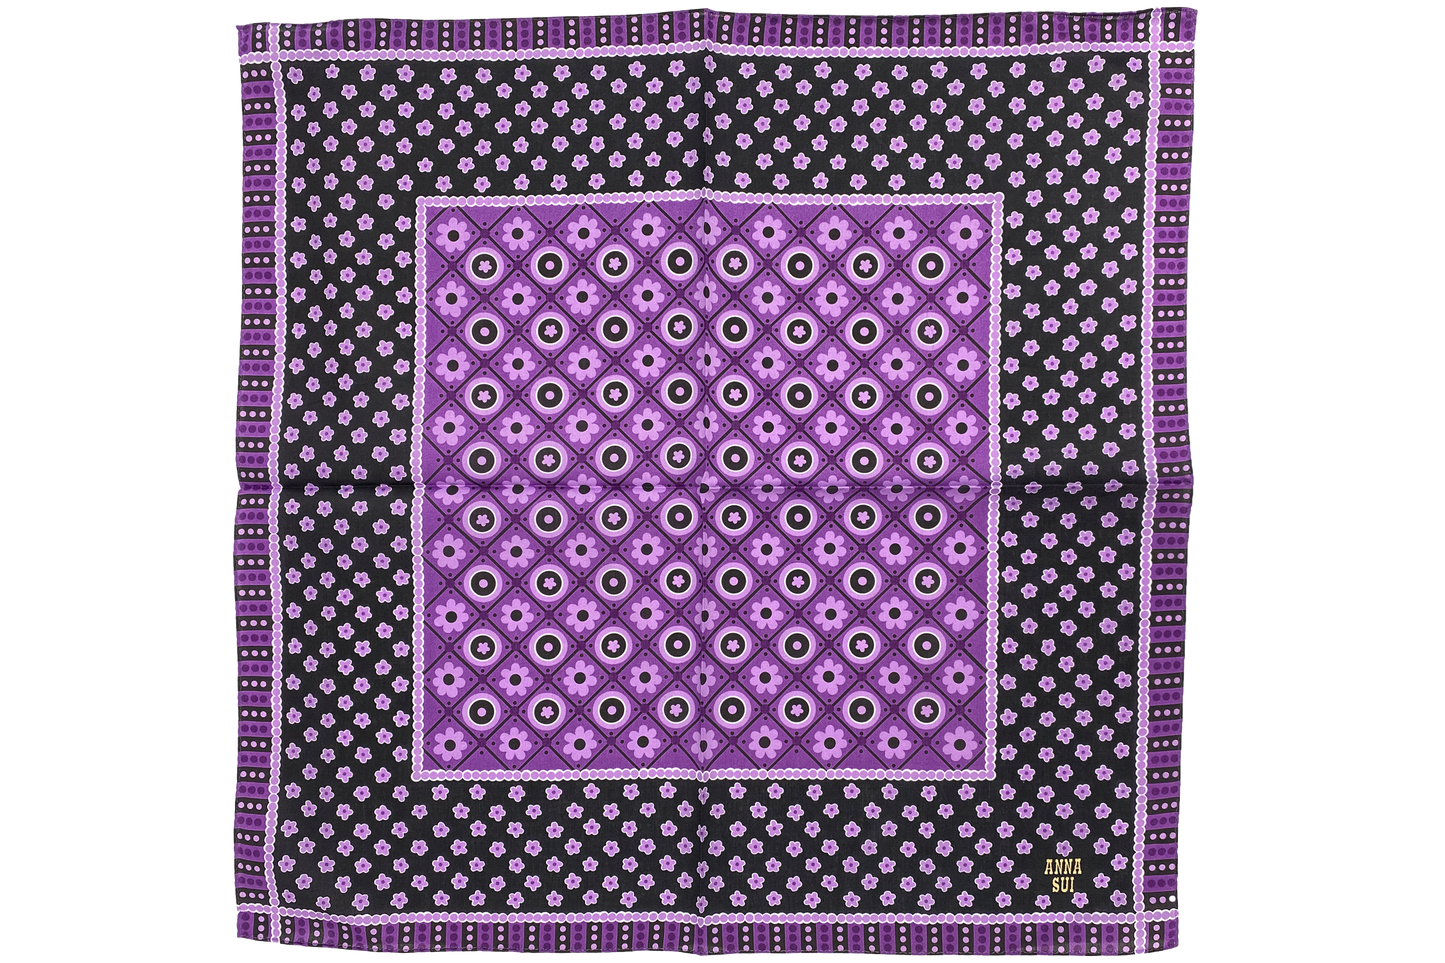 Handkerchief squared, center purple square with pink flower then black with lines of pink flowers, Anna’s label, purplish border